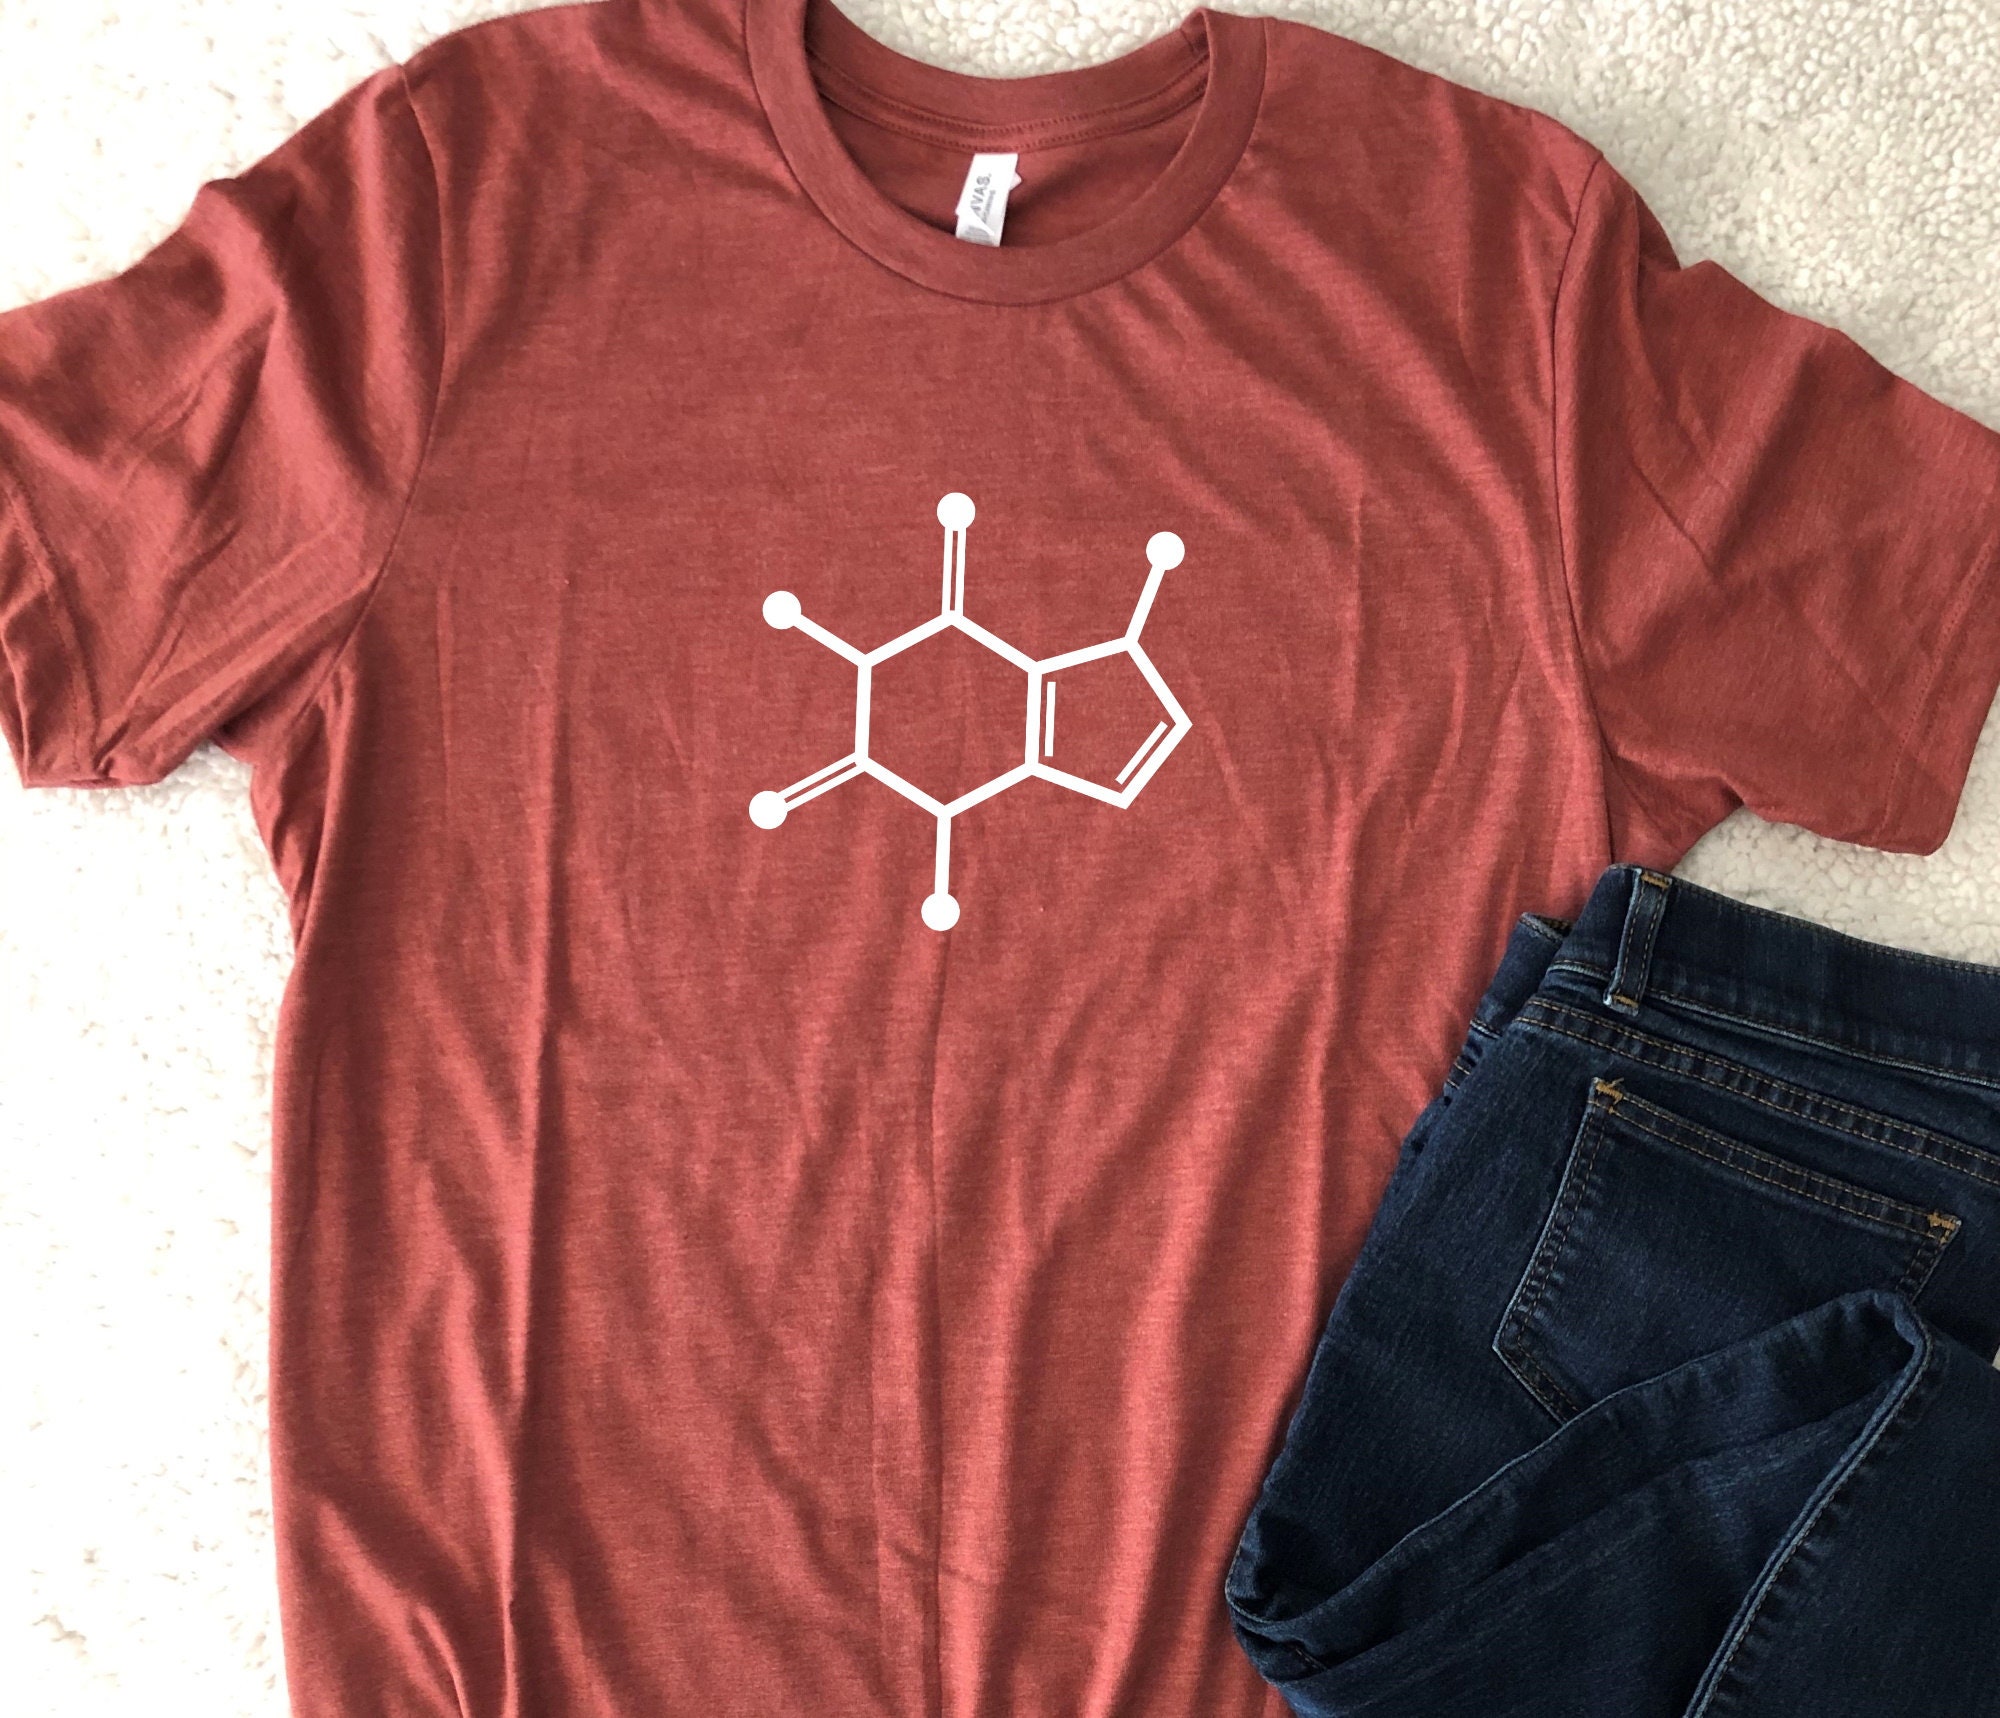 Powered By Caffeine T-Shirt funny coffee Molecule 13 colours Men's Women's sizes